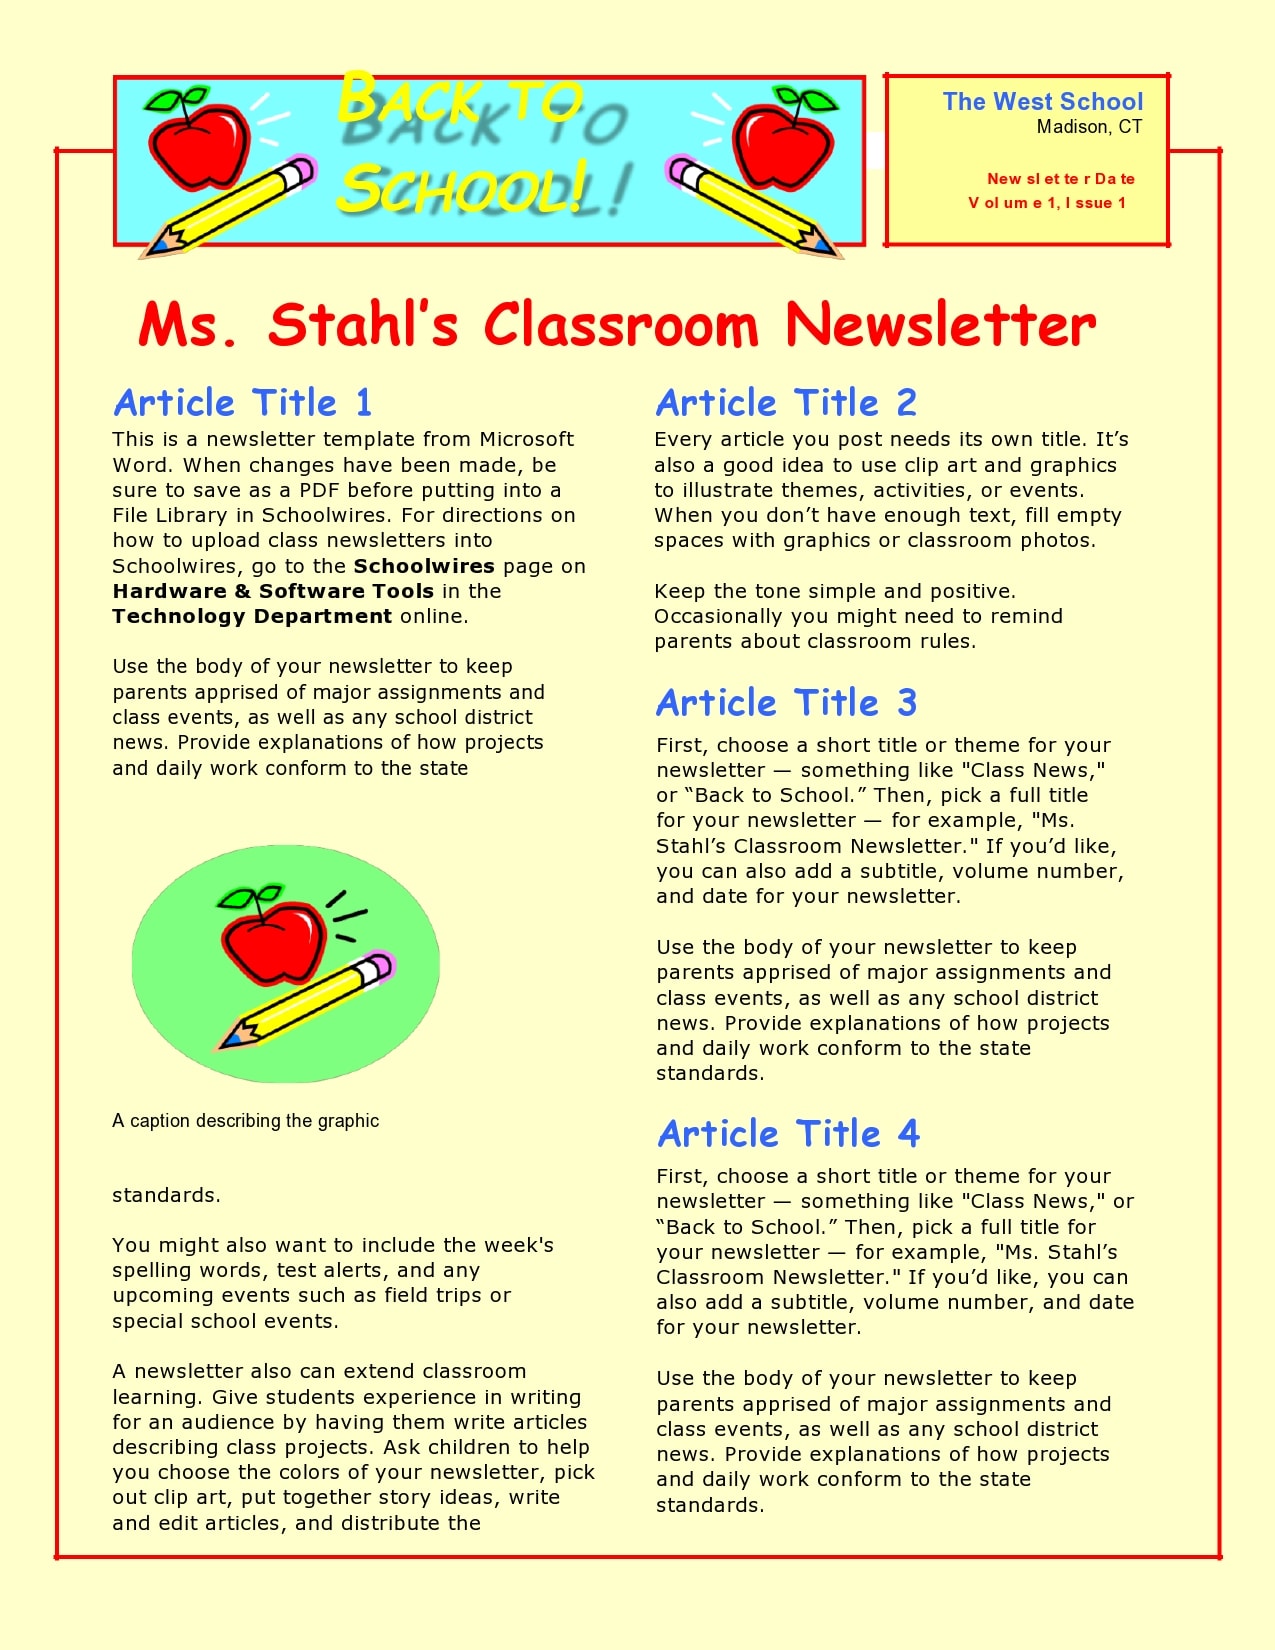 teacher newsletter examples to parents